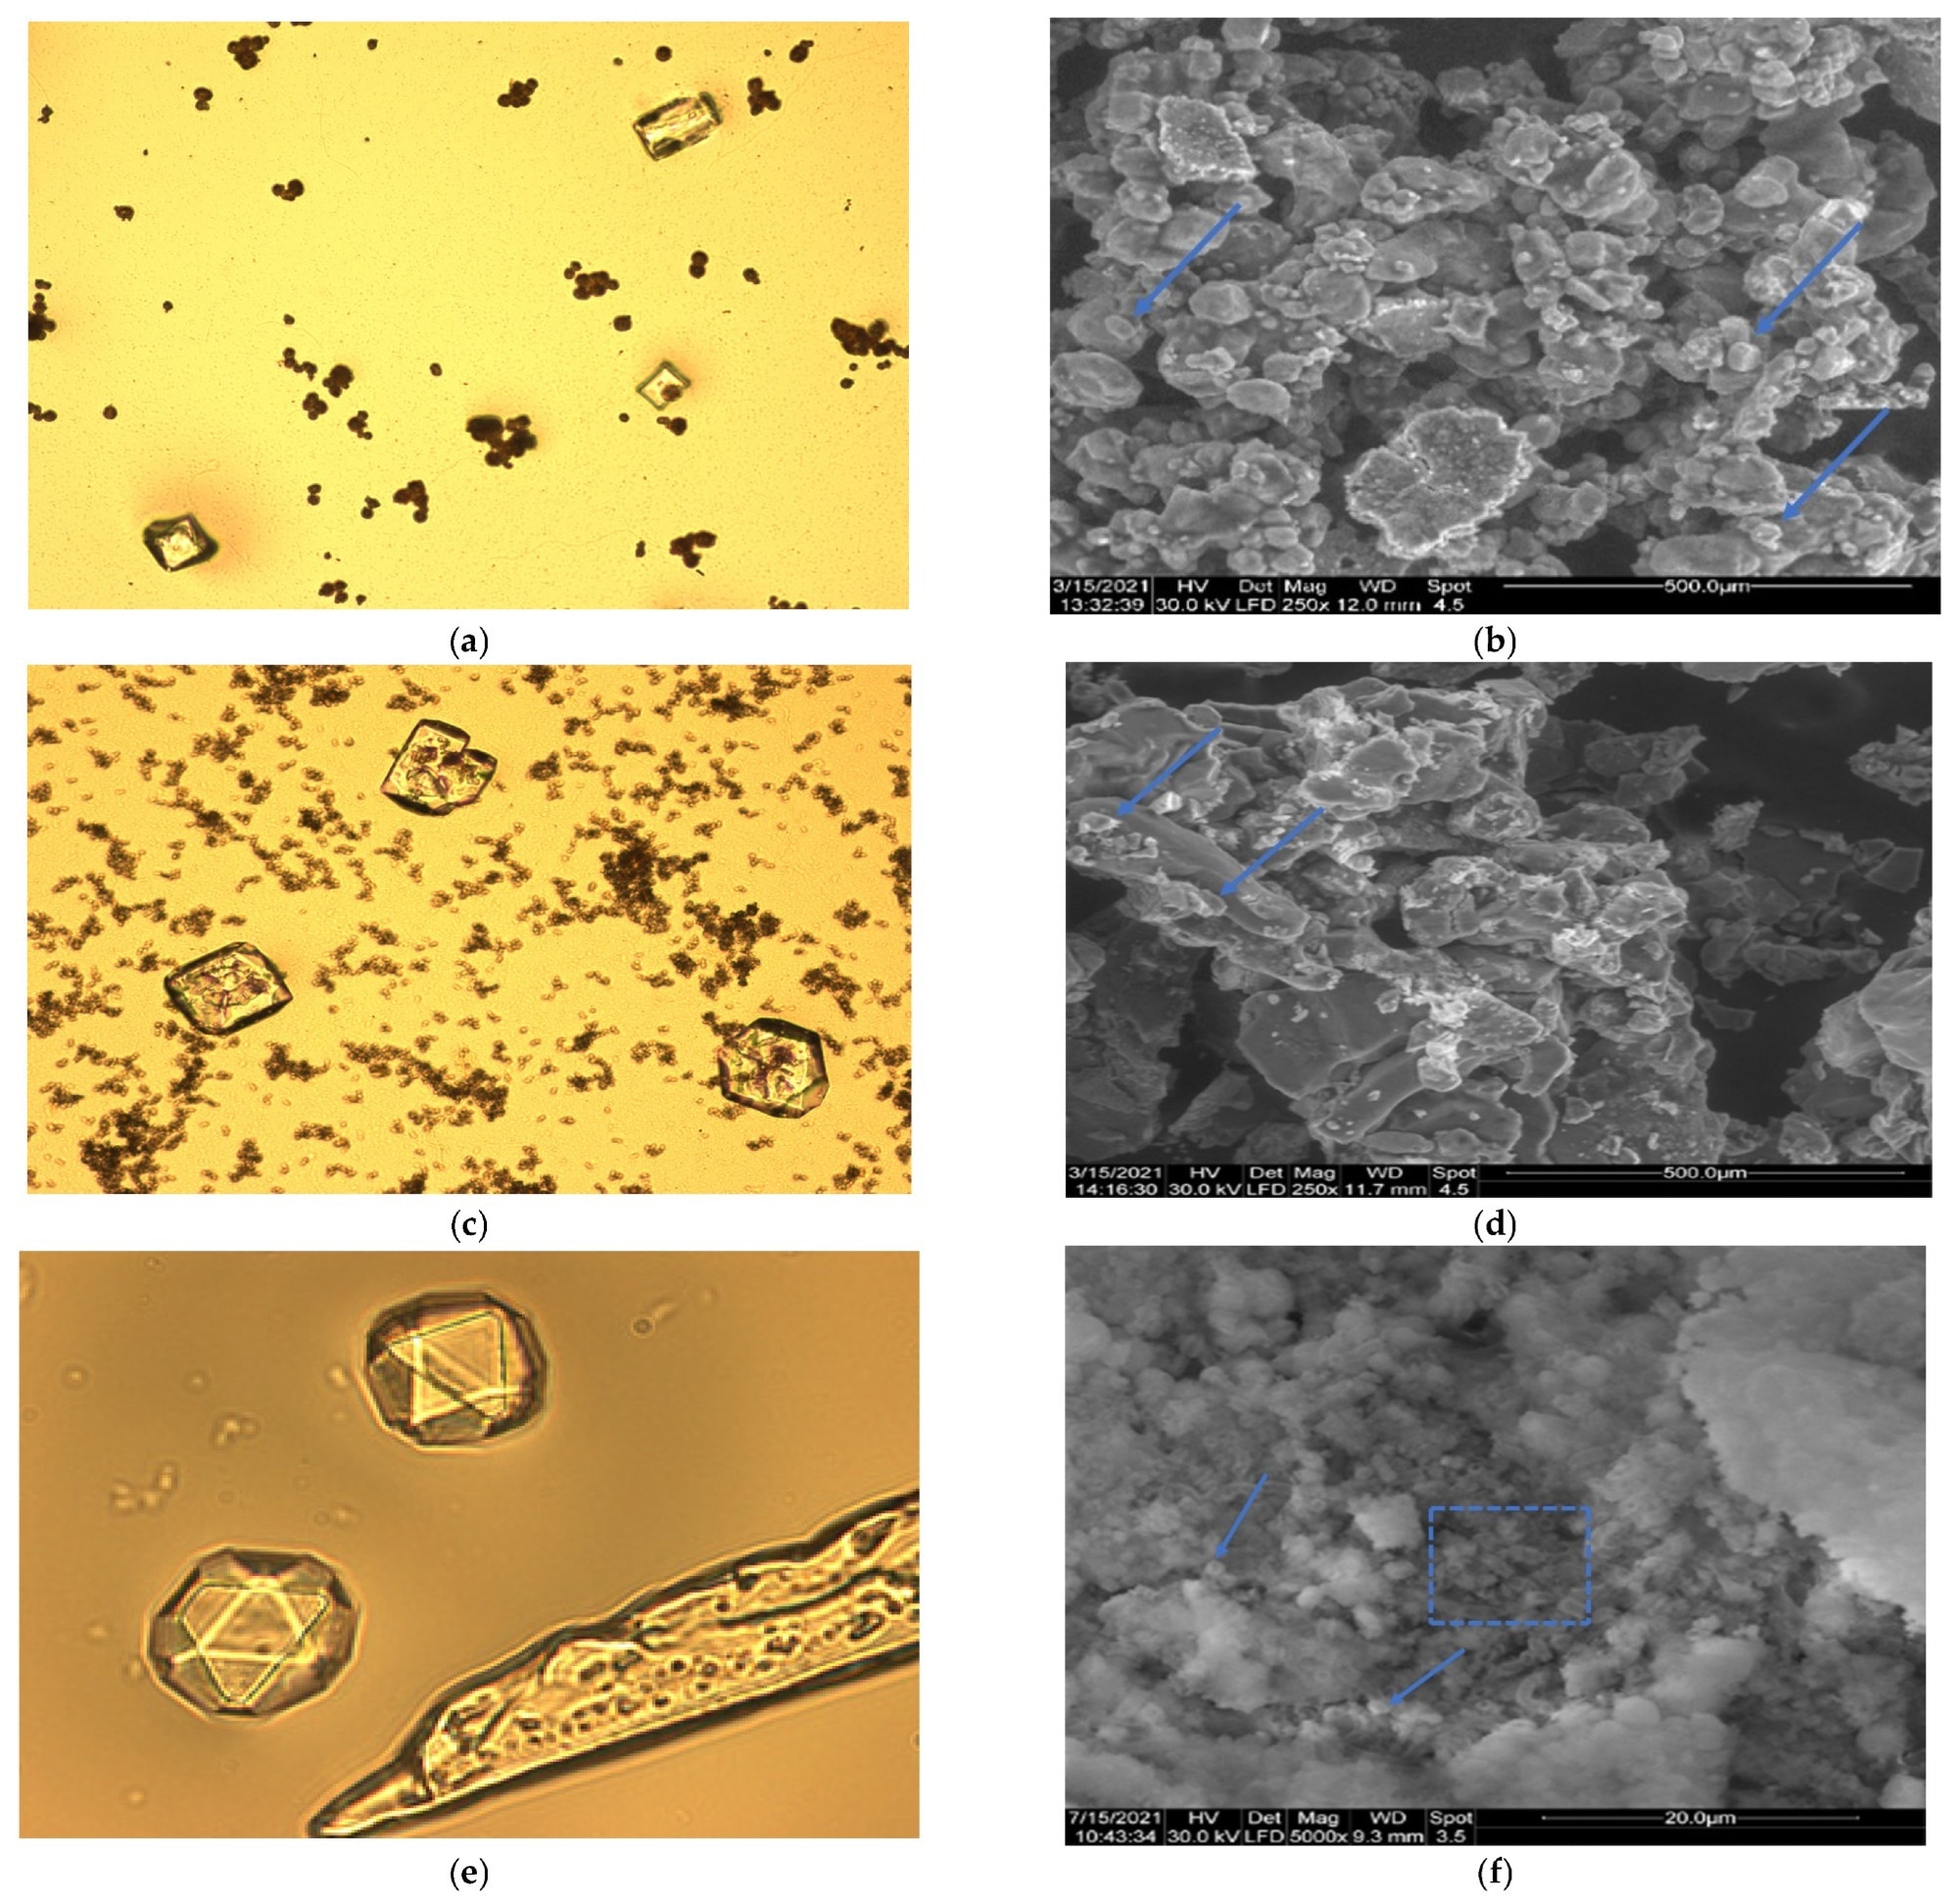 Microscopic investigations of deposits obtained from bacteria cultured on medium with urea and calcium ions. On left, optical microscopy is shown, and on the right, SEM analysis, as: (a) Spores and crystals carbonate from Bacillus amyloliquefaciens (20×); (b) SEM analysis of pellet from Bacillus amyloliquefaciens (250×); (c) Spores and crystals carbonate from Bacillus licheniformis (20×); (d) SEM analysis of pellet from Bacillus licheniformis (250×); (e) Crystals carbonate and germens of crystallization at Bacillus subtilis (100×); (f) SEM analysis of deposit from Bacillus subtilis (5000×). Dotted square-bacterial cells; arrow—calcium carbonate crystals.